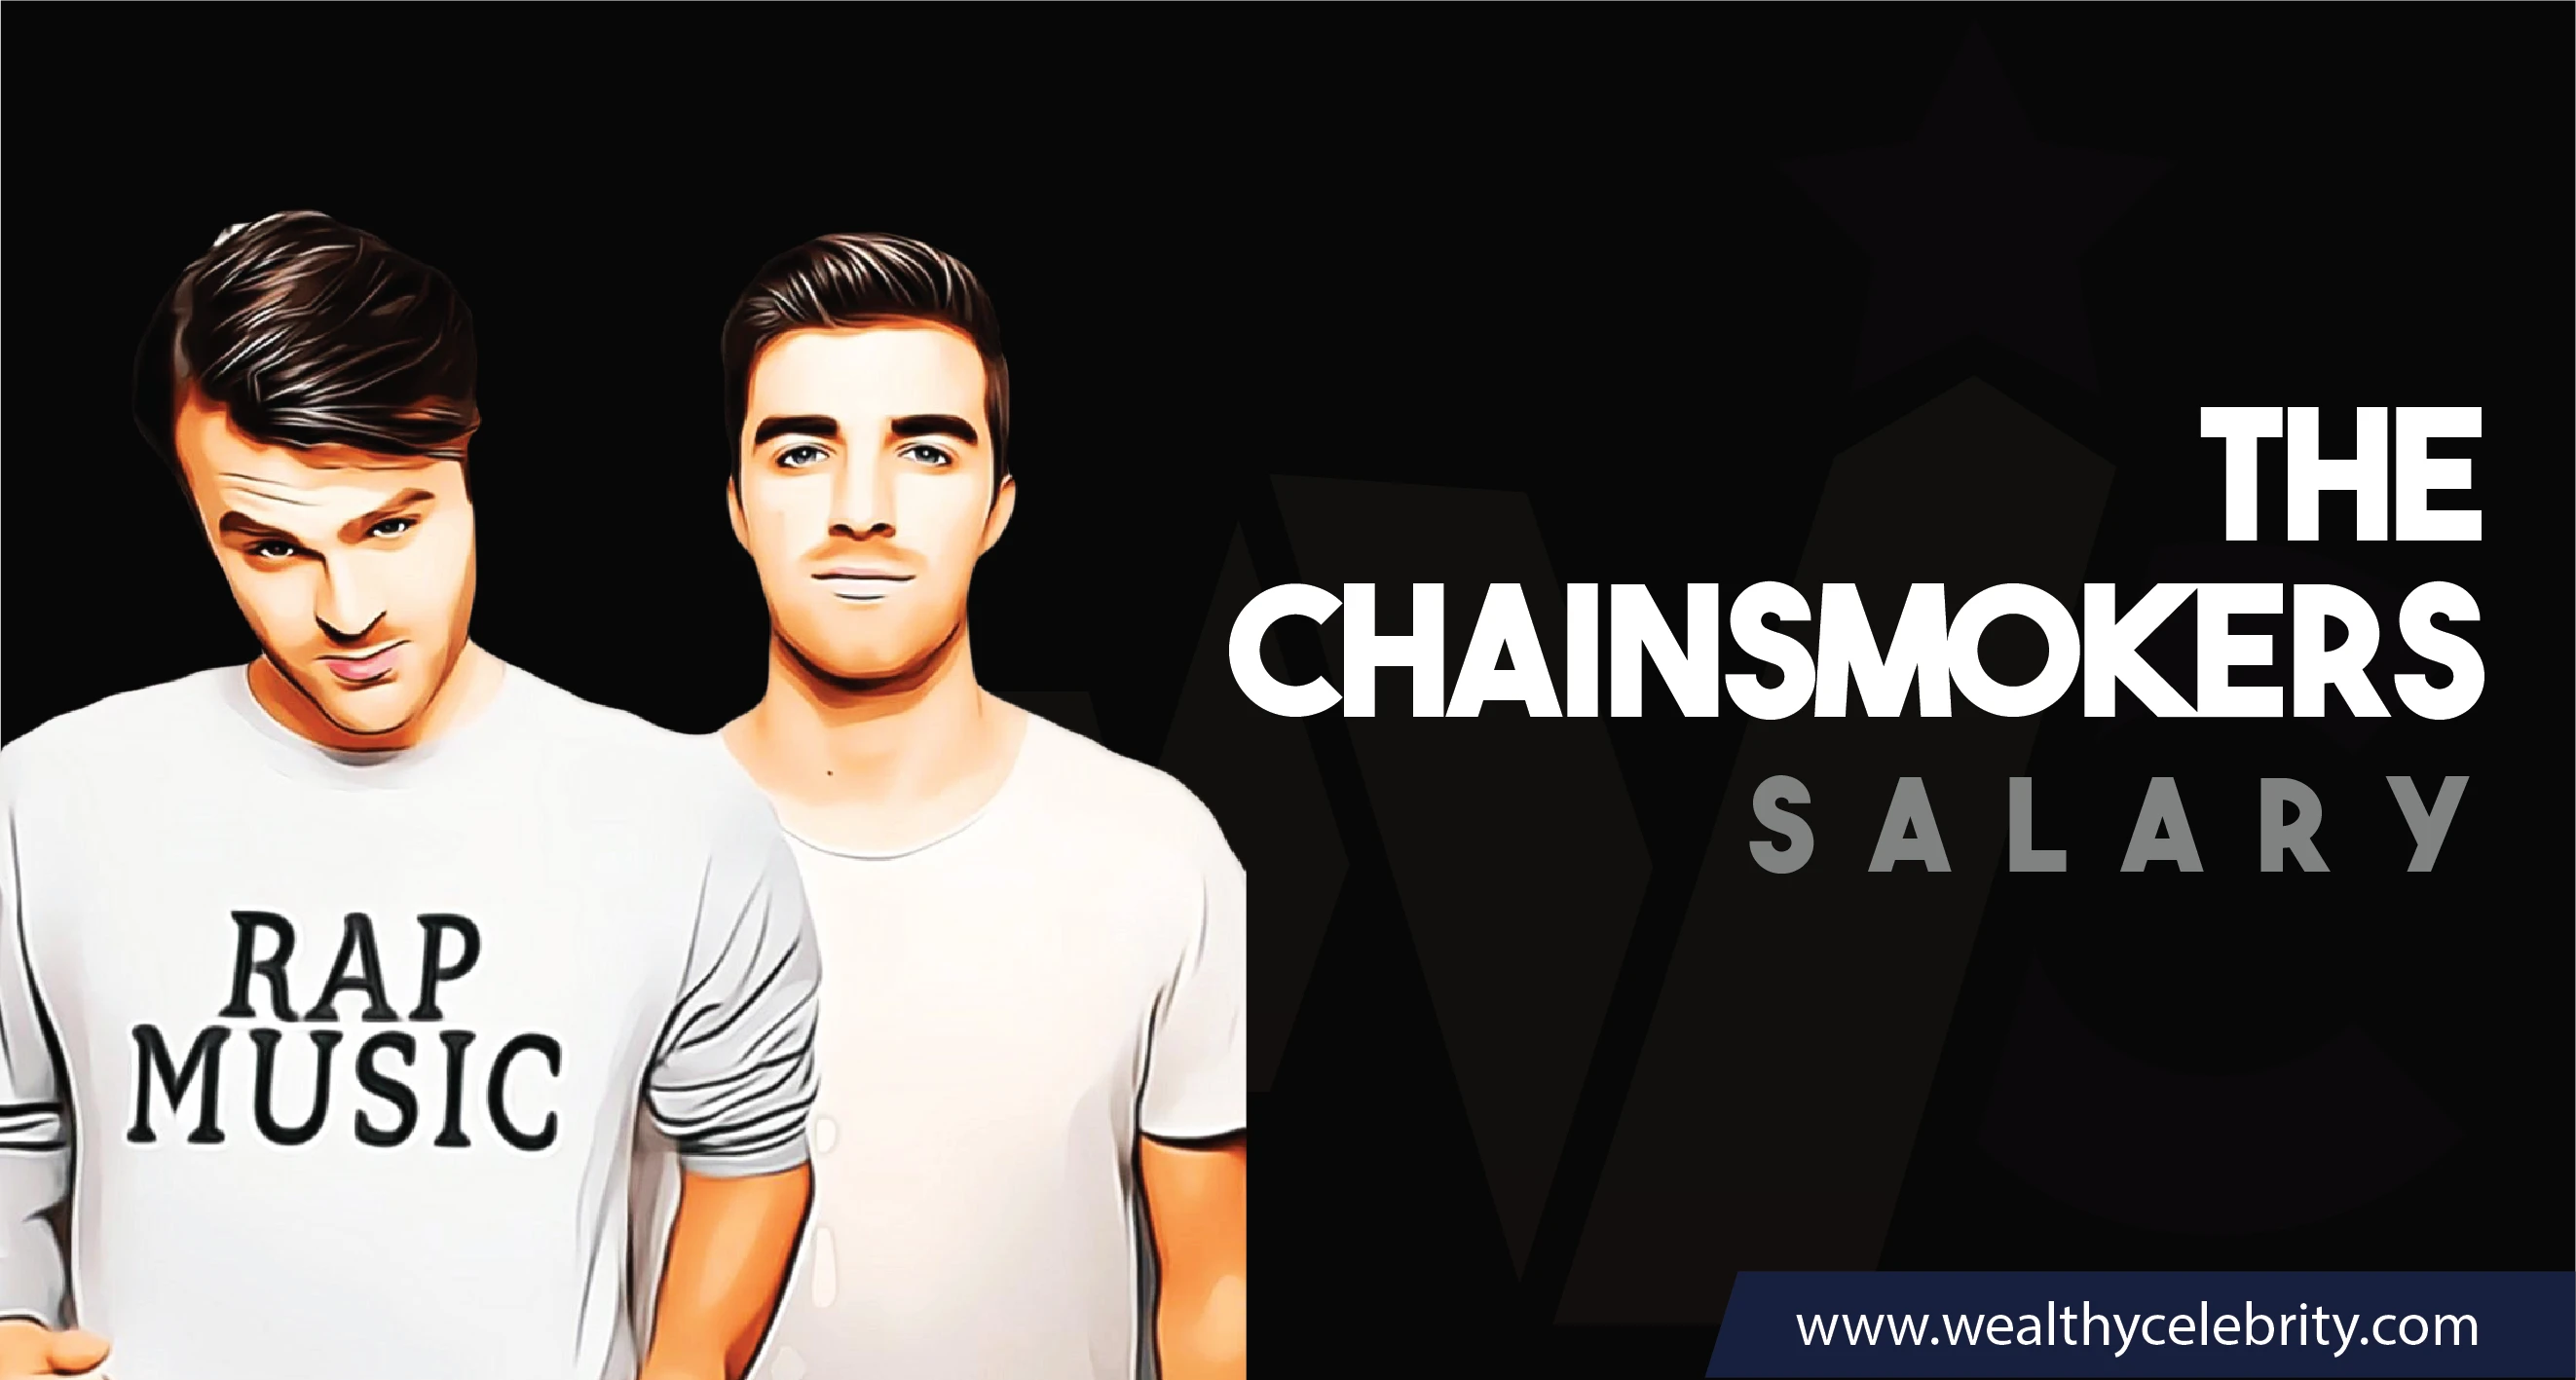 The Chainsmokers DJ - Current Salary Net Worth